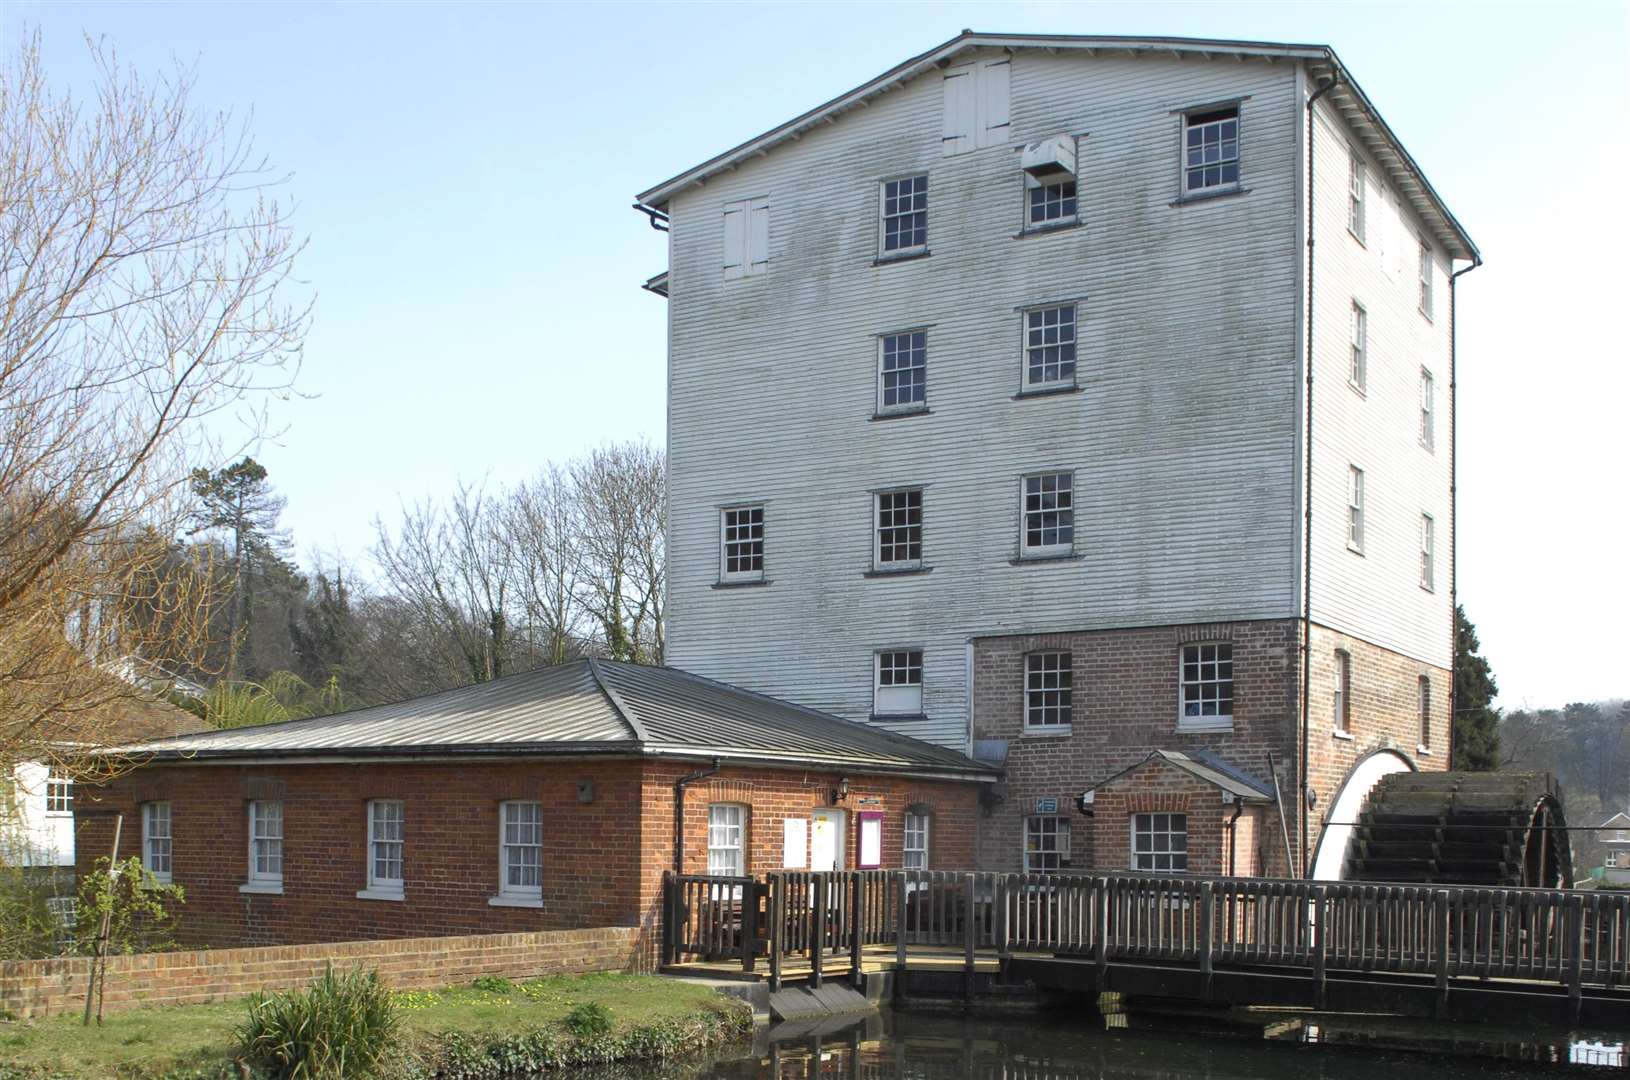 Crabble Corn Mill, in Lower Road, Dover. Picture: Martin Apps